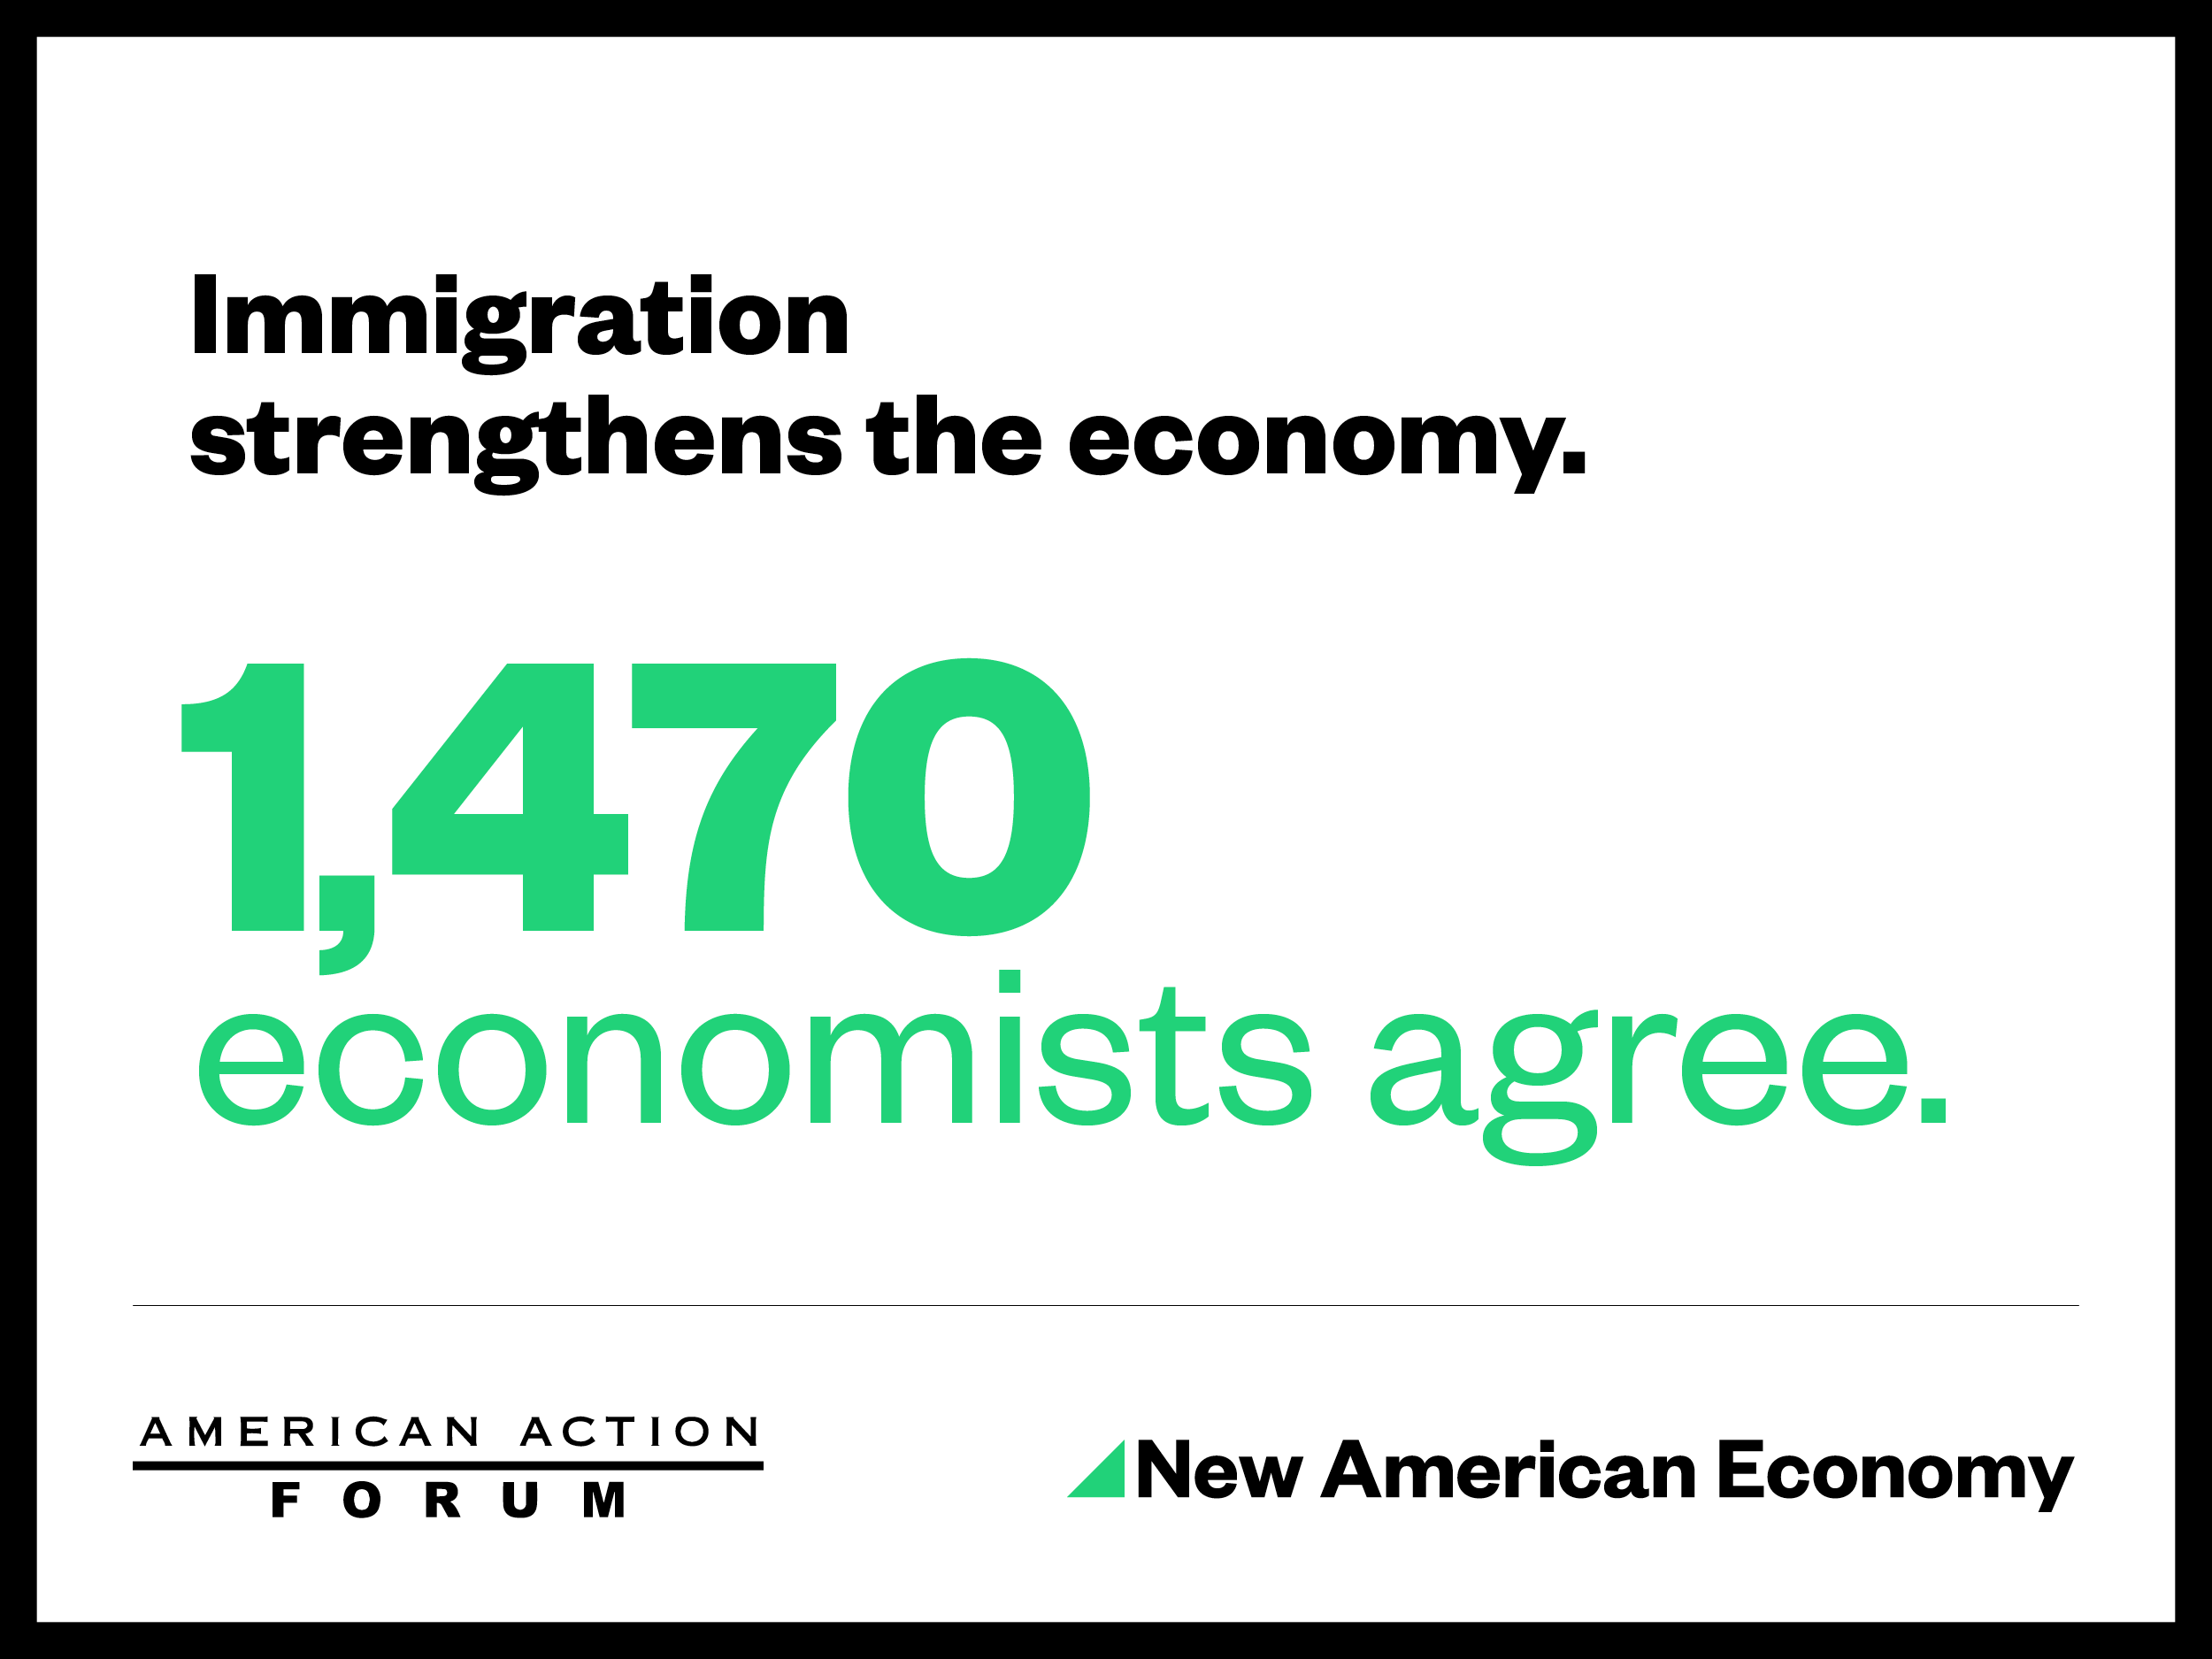 Immigration strengthens the economy